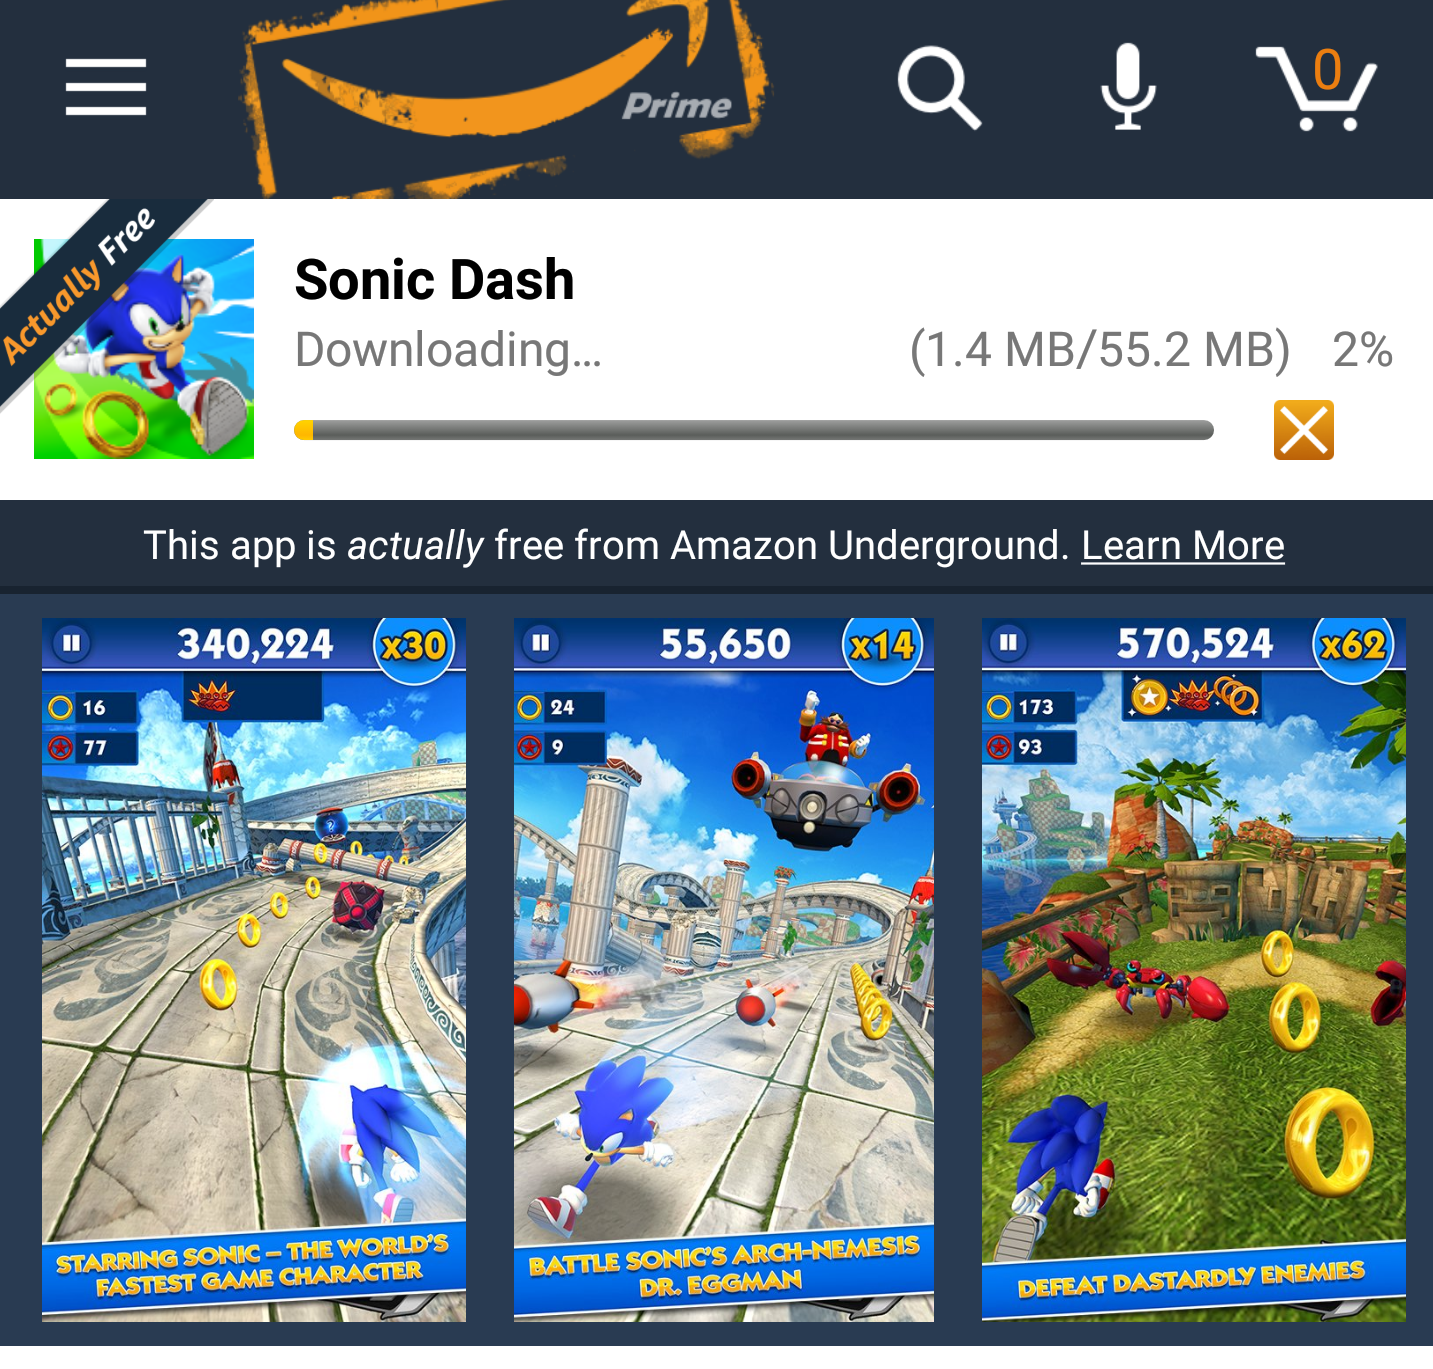 Apps, free apps, android apps, amazon underground, free amazon apps, free games, family apps, games,